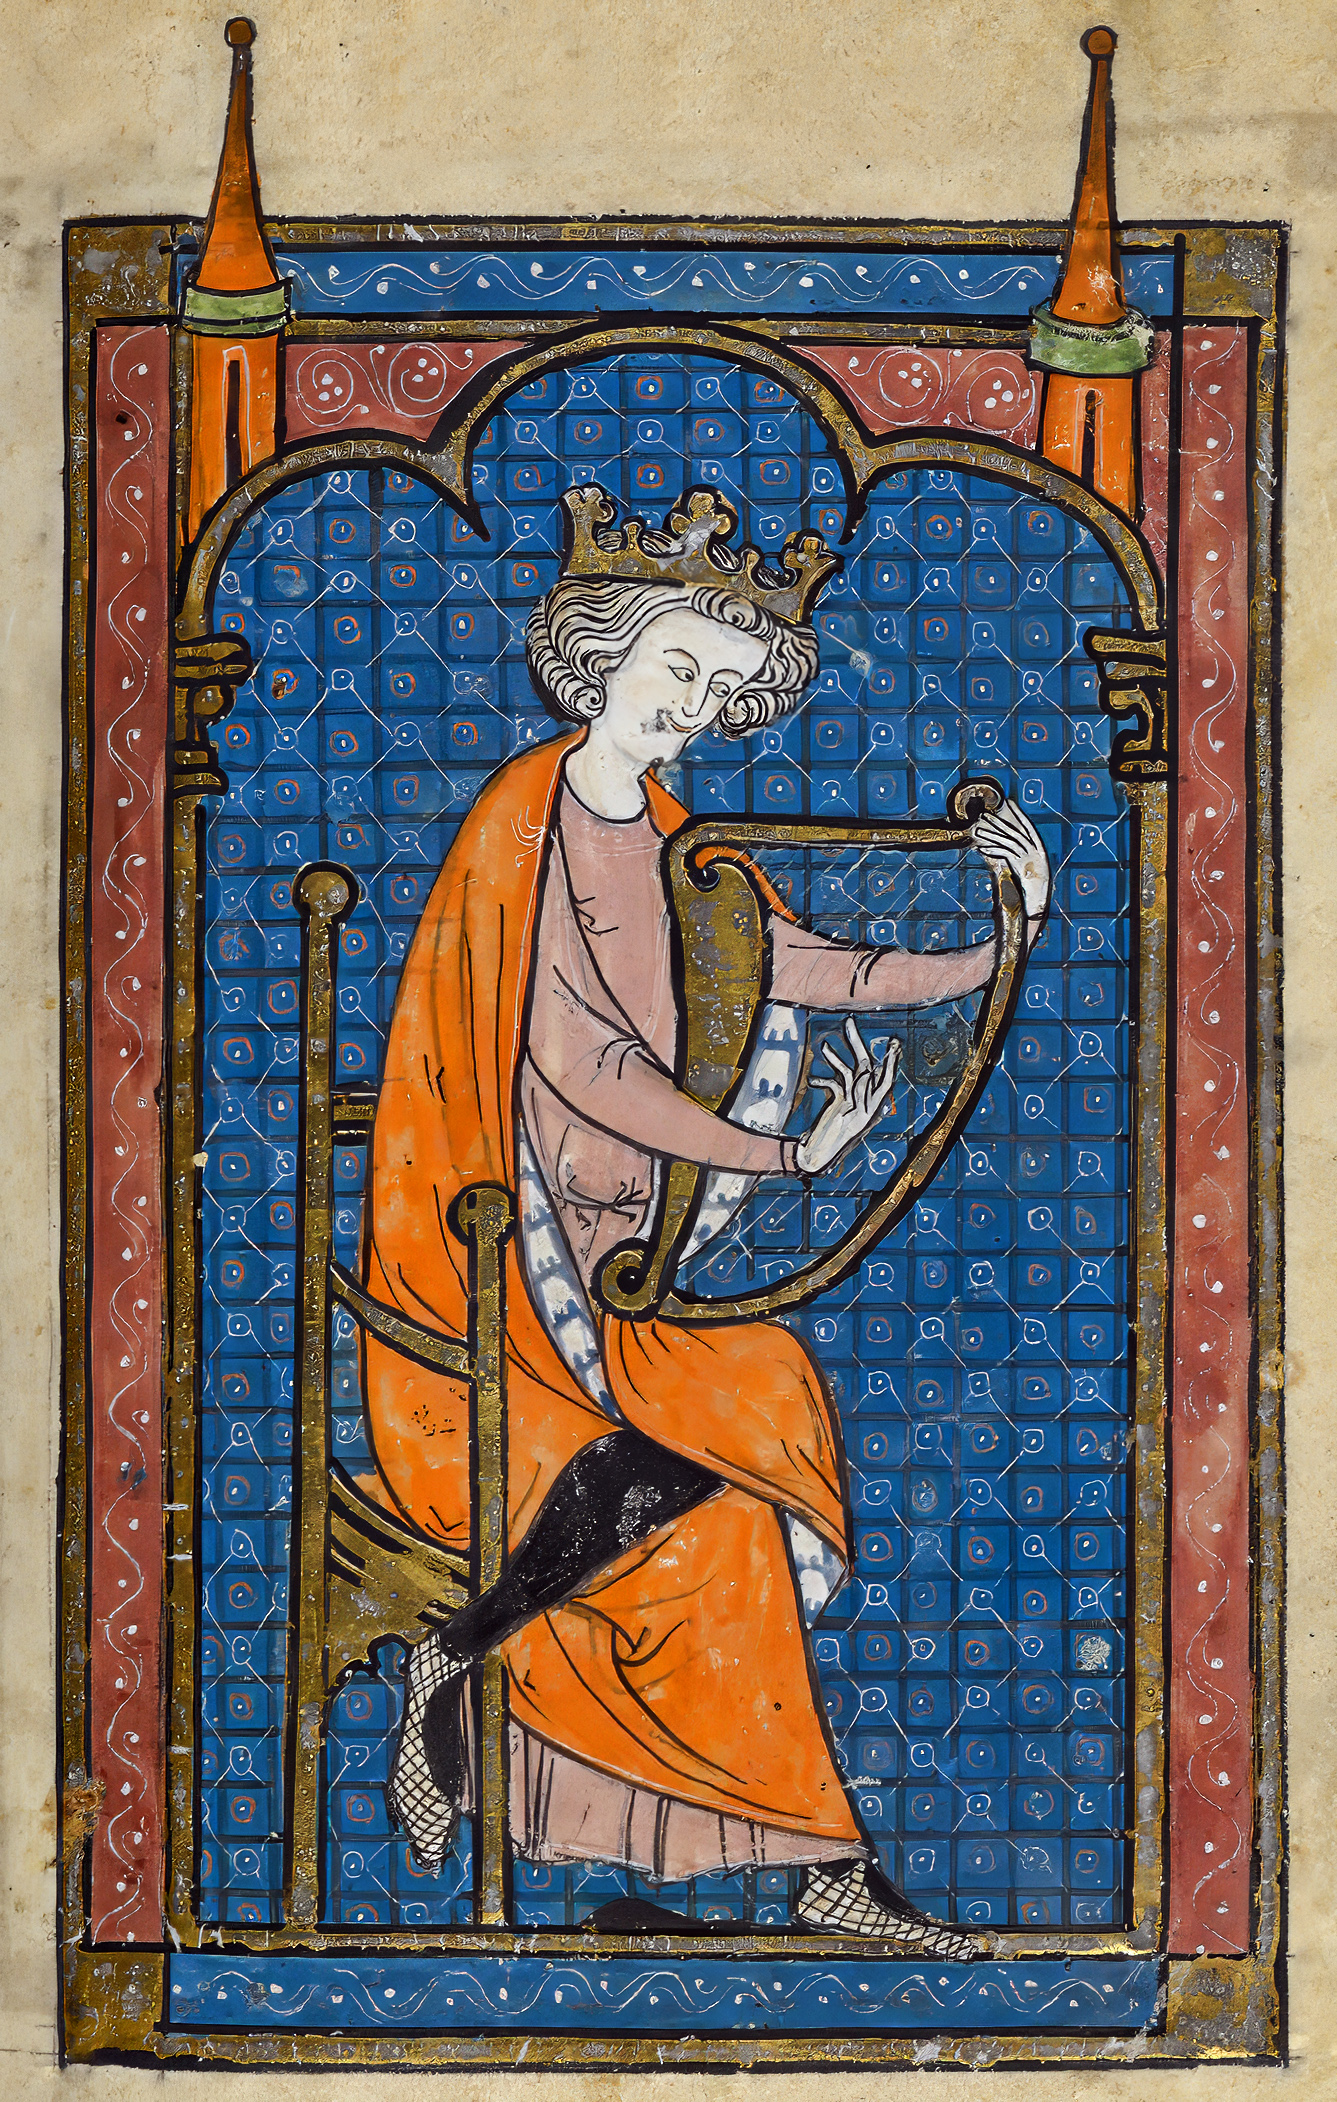 King David Playing Harp | North French Hebrew Miscellany (c. 1277-86) | British Museum